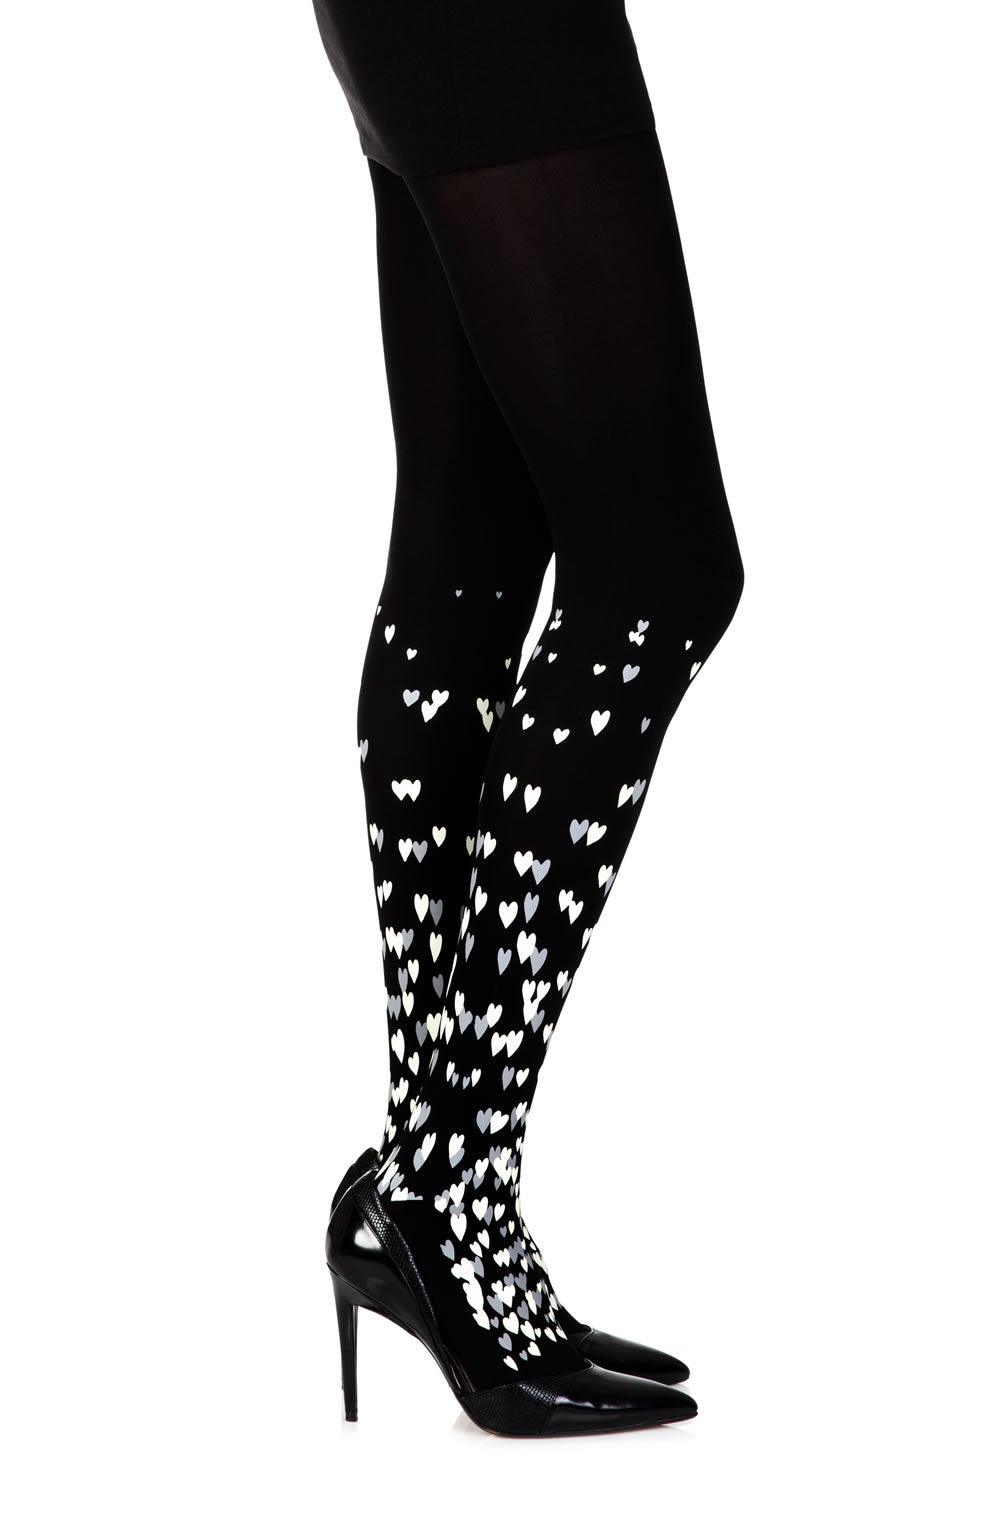 Zohara "Queen Of Hearts" Black Print Tights - Sydney Rose Lingerie 